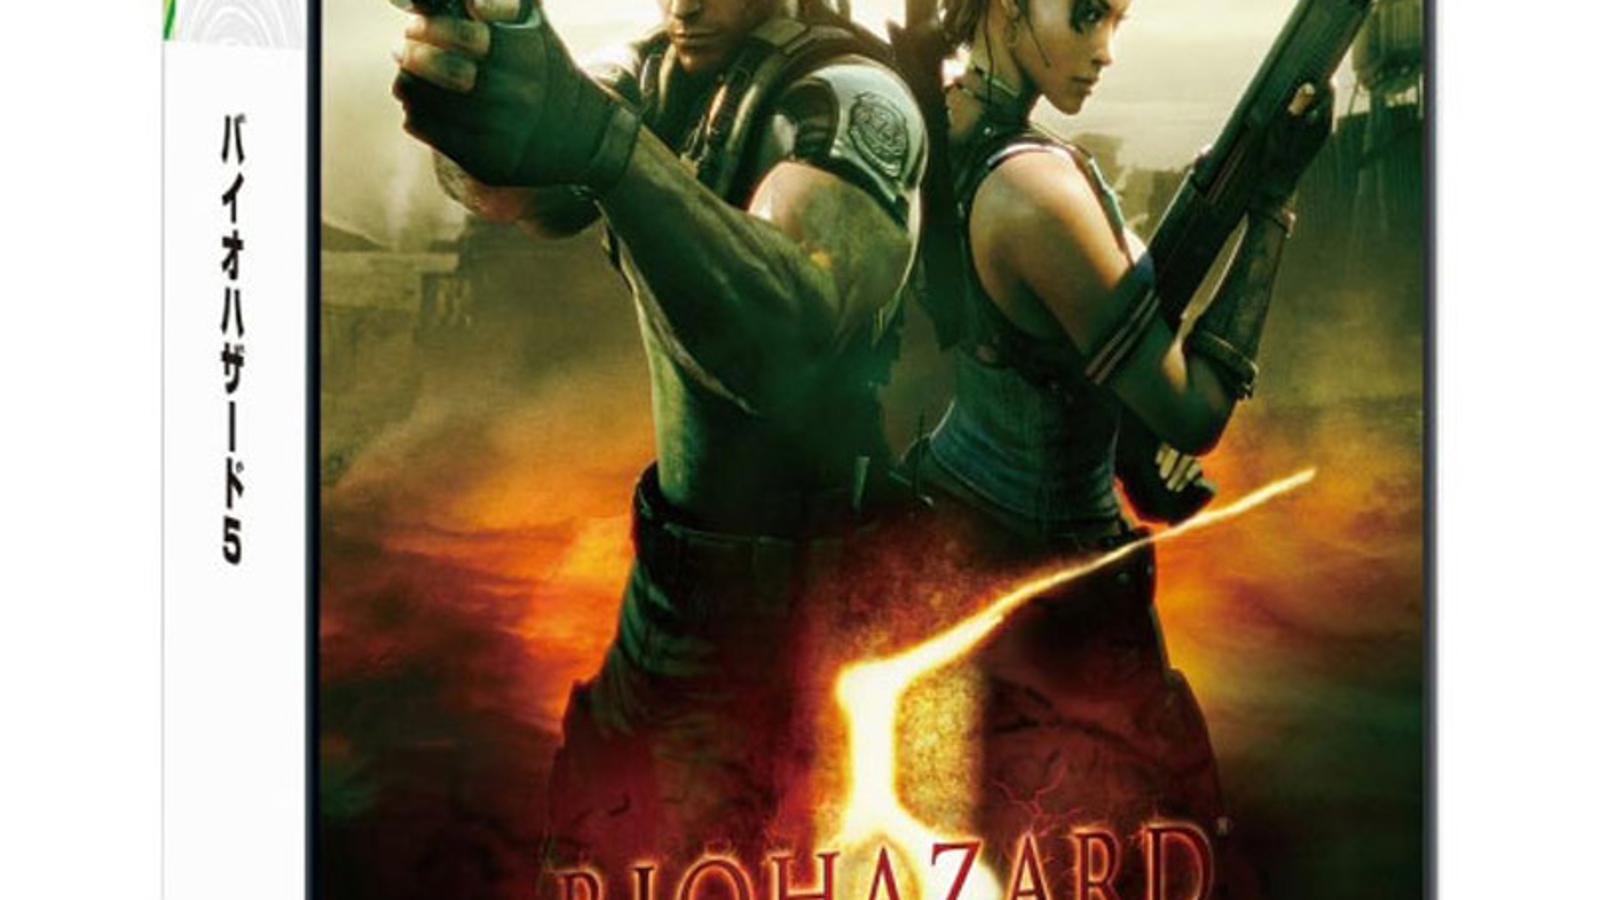 resident evil 5 save game editor xbox 360 download